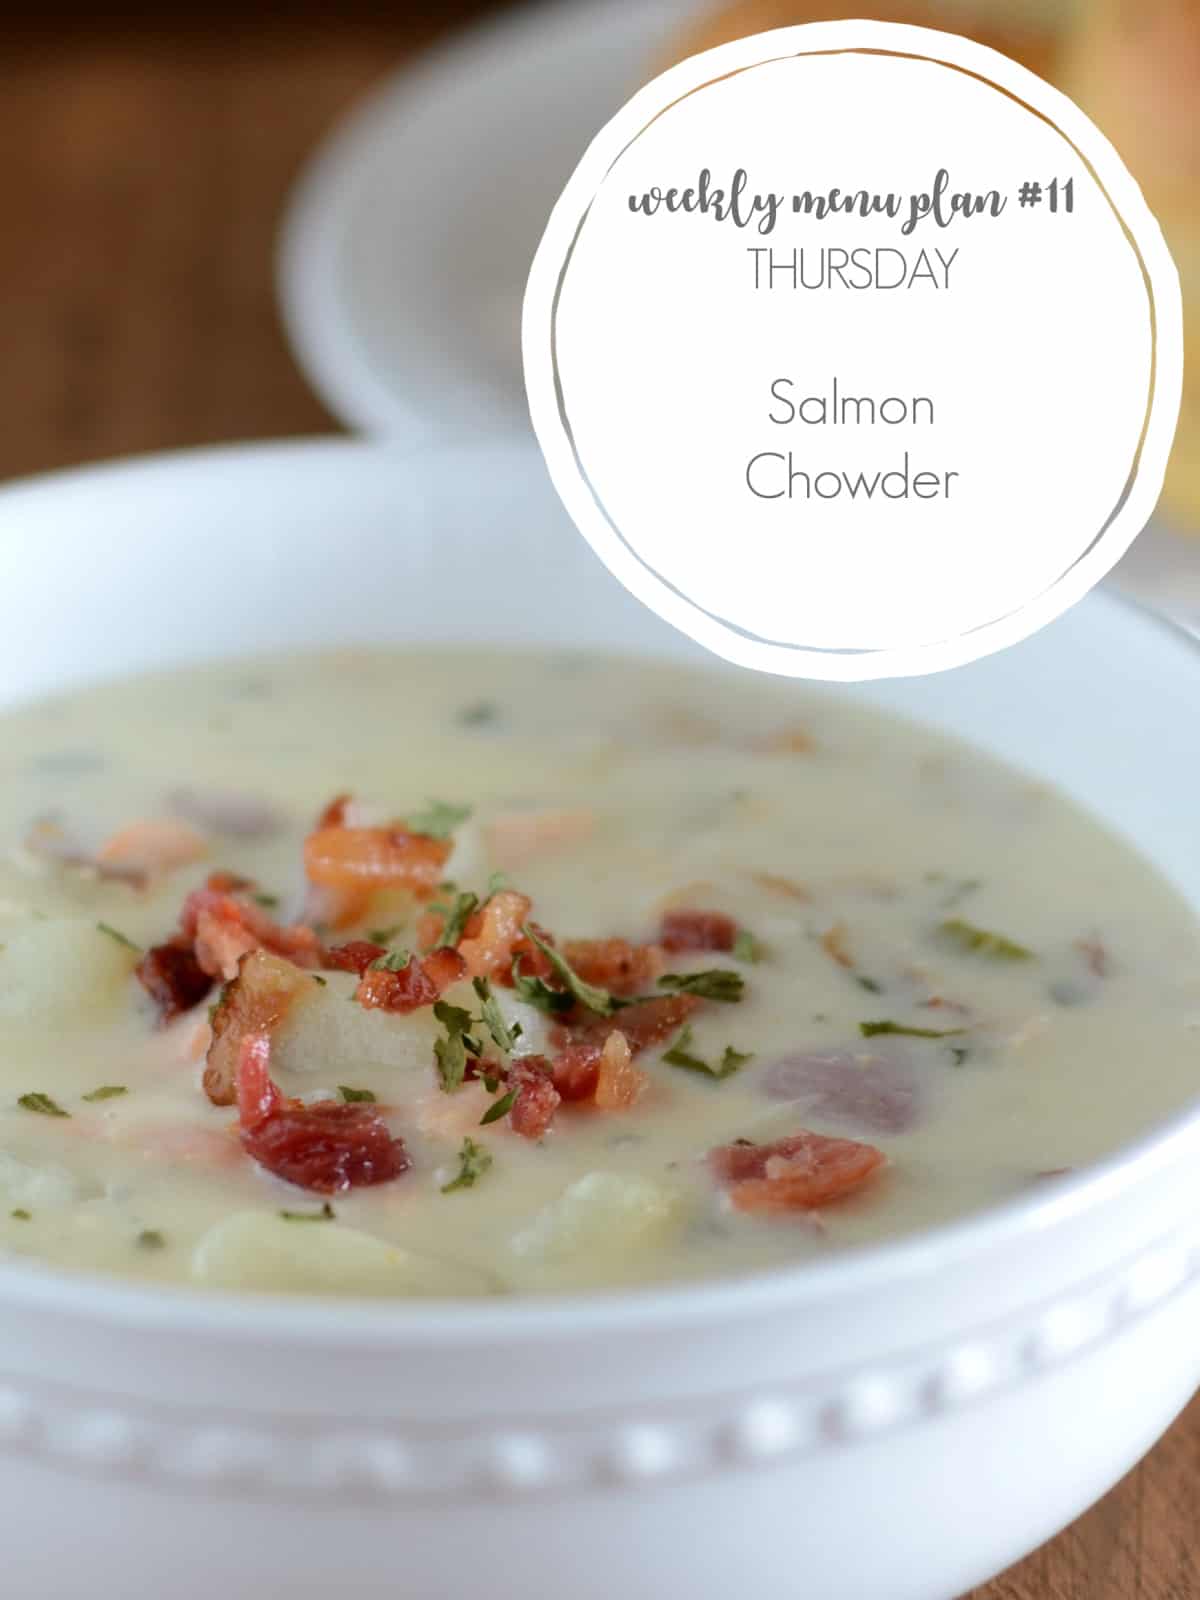 salmon chowder for meal plan #11